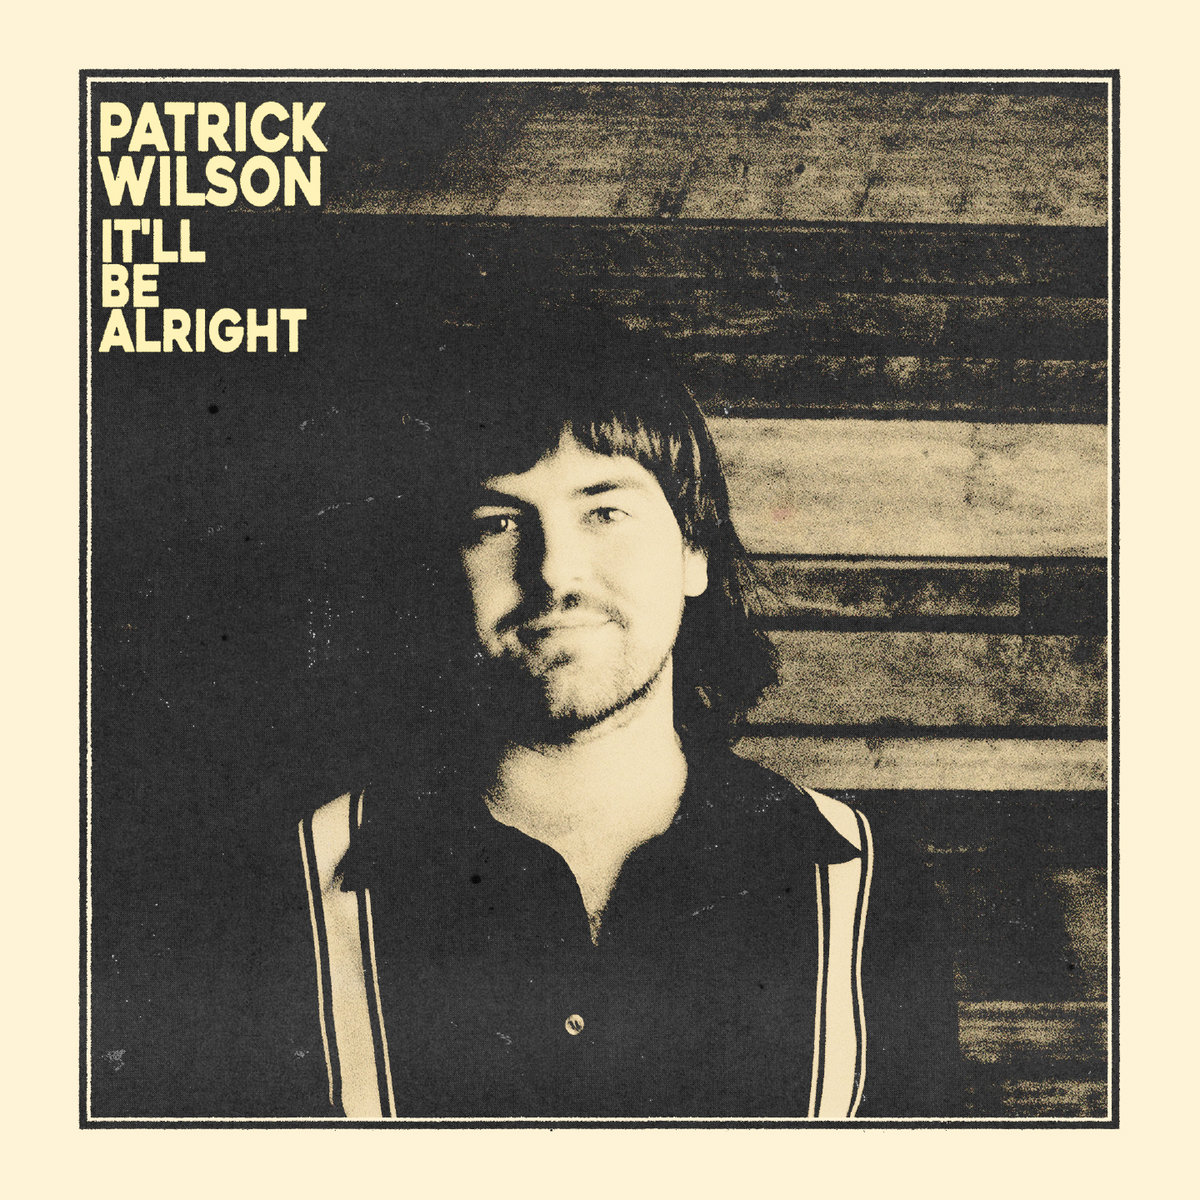 ALBUM REVIEW: Patrick Wilson – It’ll Be Alright